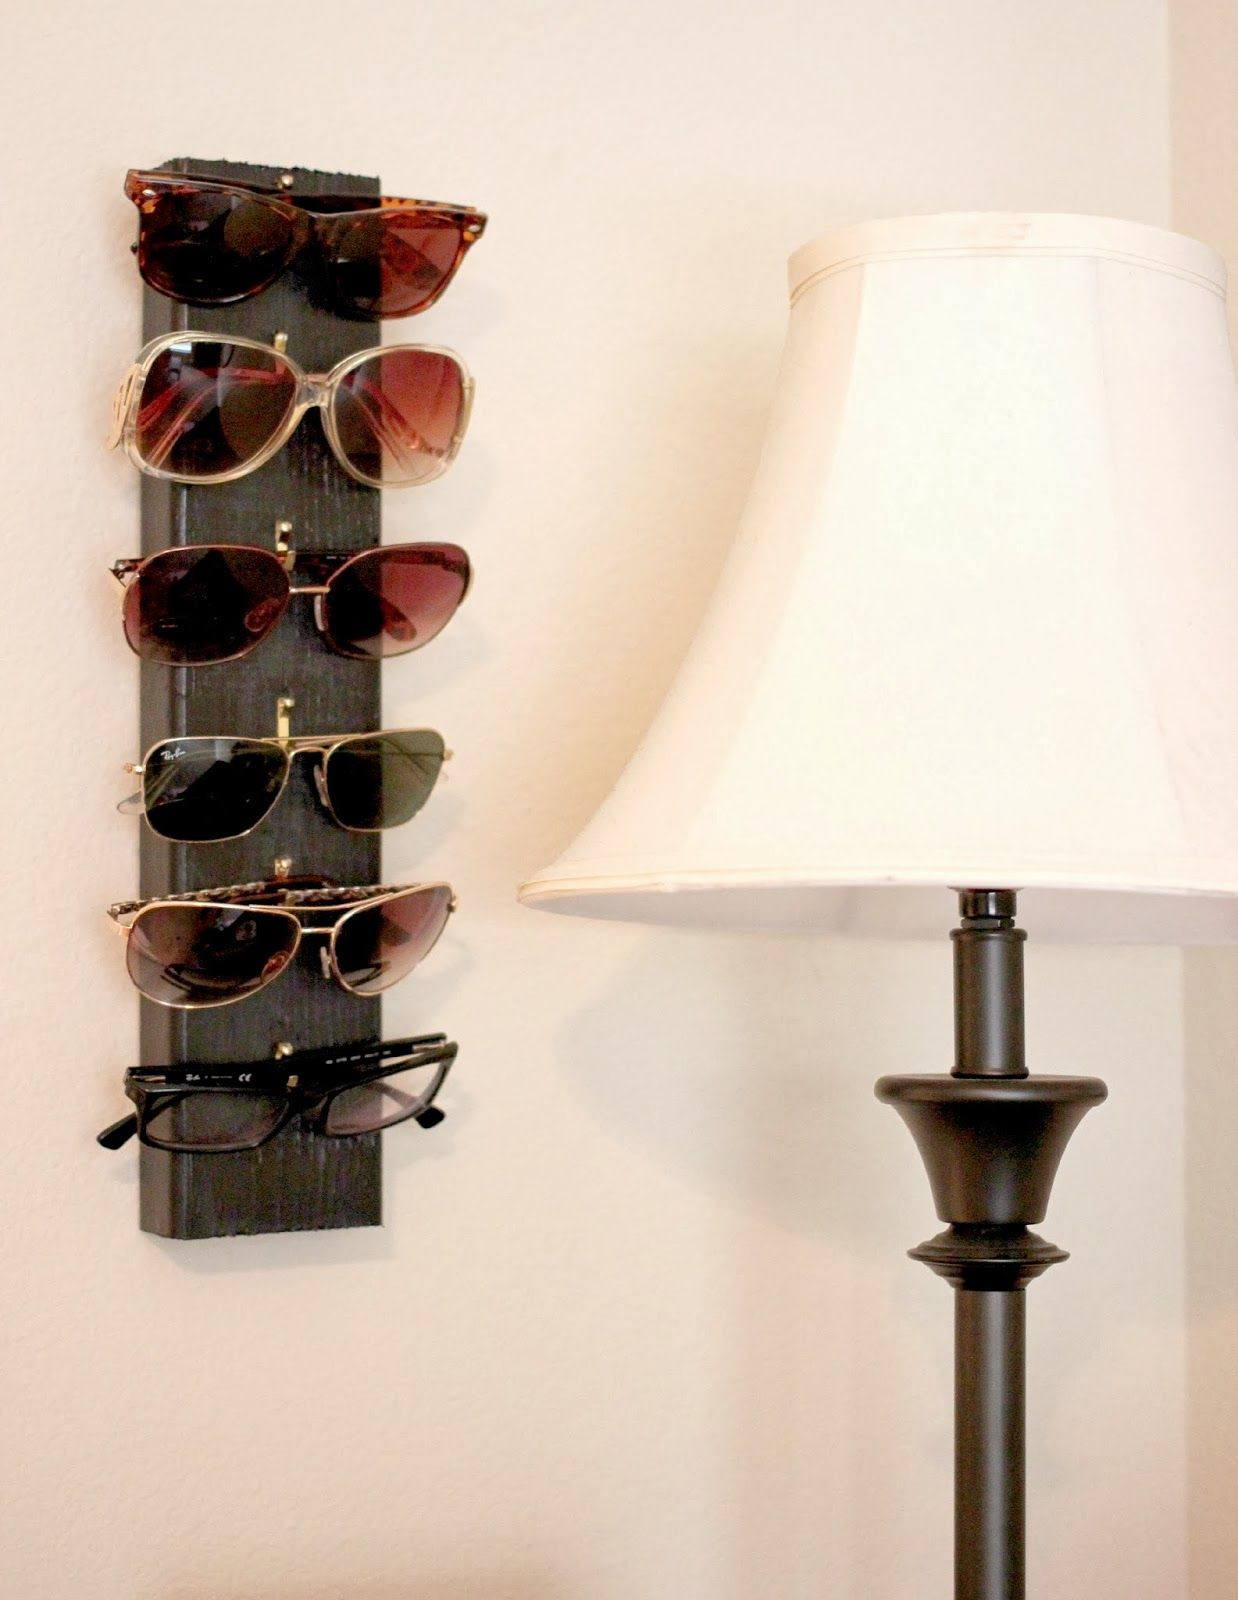 Sunglass Organizer DIY
 An easy diy project to hang all your sunglasses you just